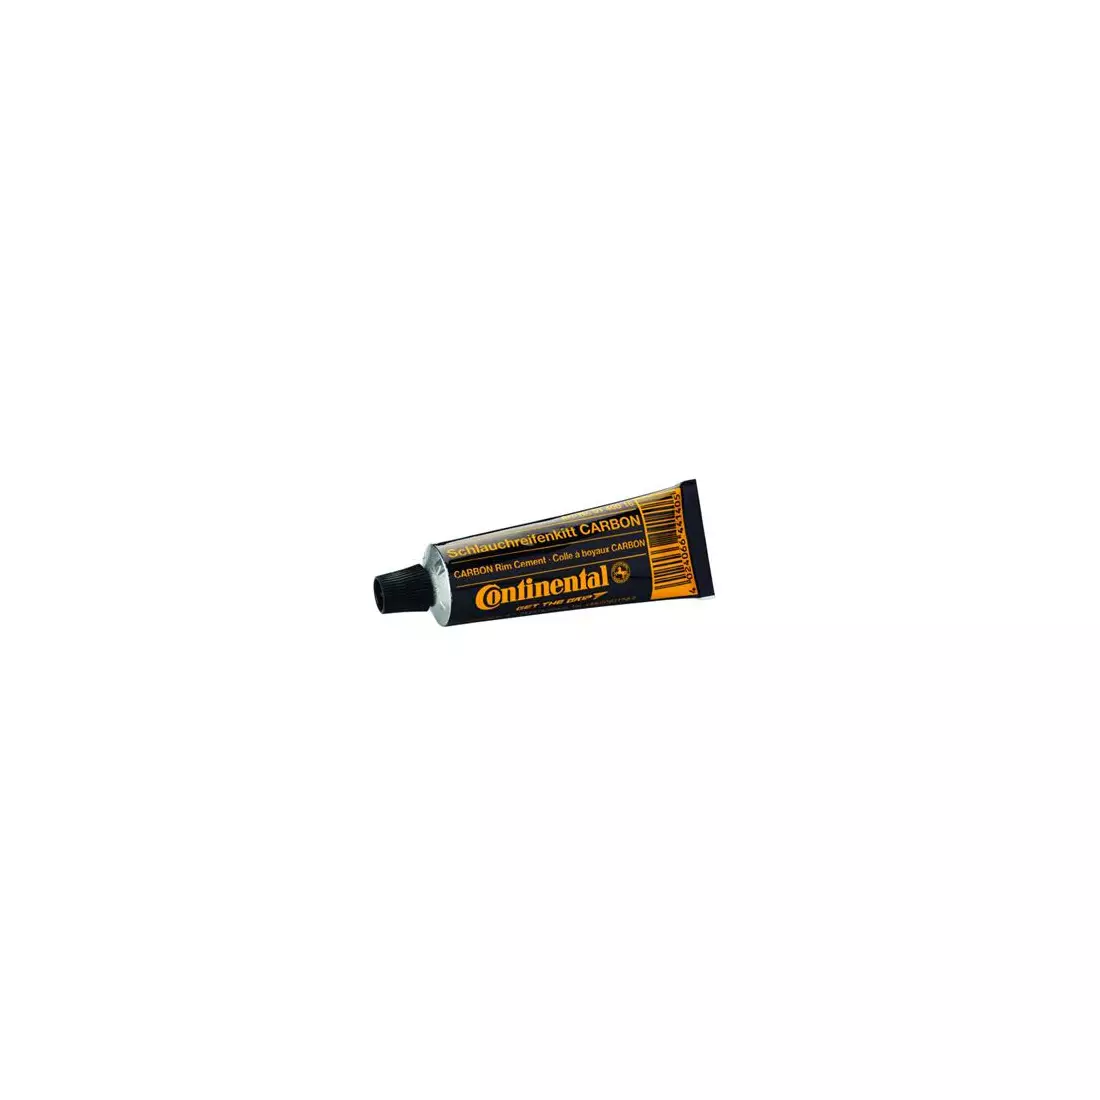 CONTINENTAL Tubular tyre Adhesive 25g CO0140016